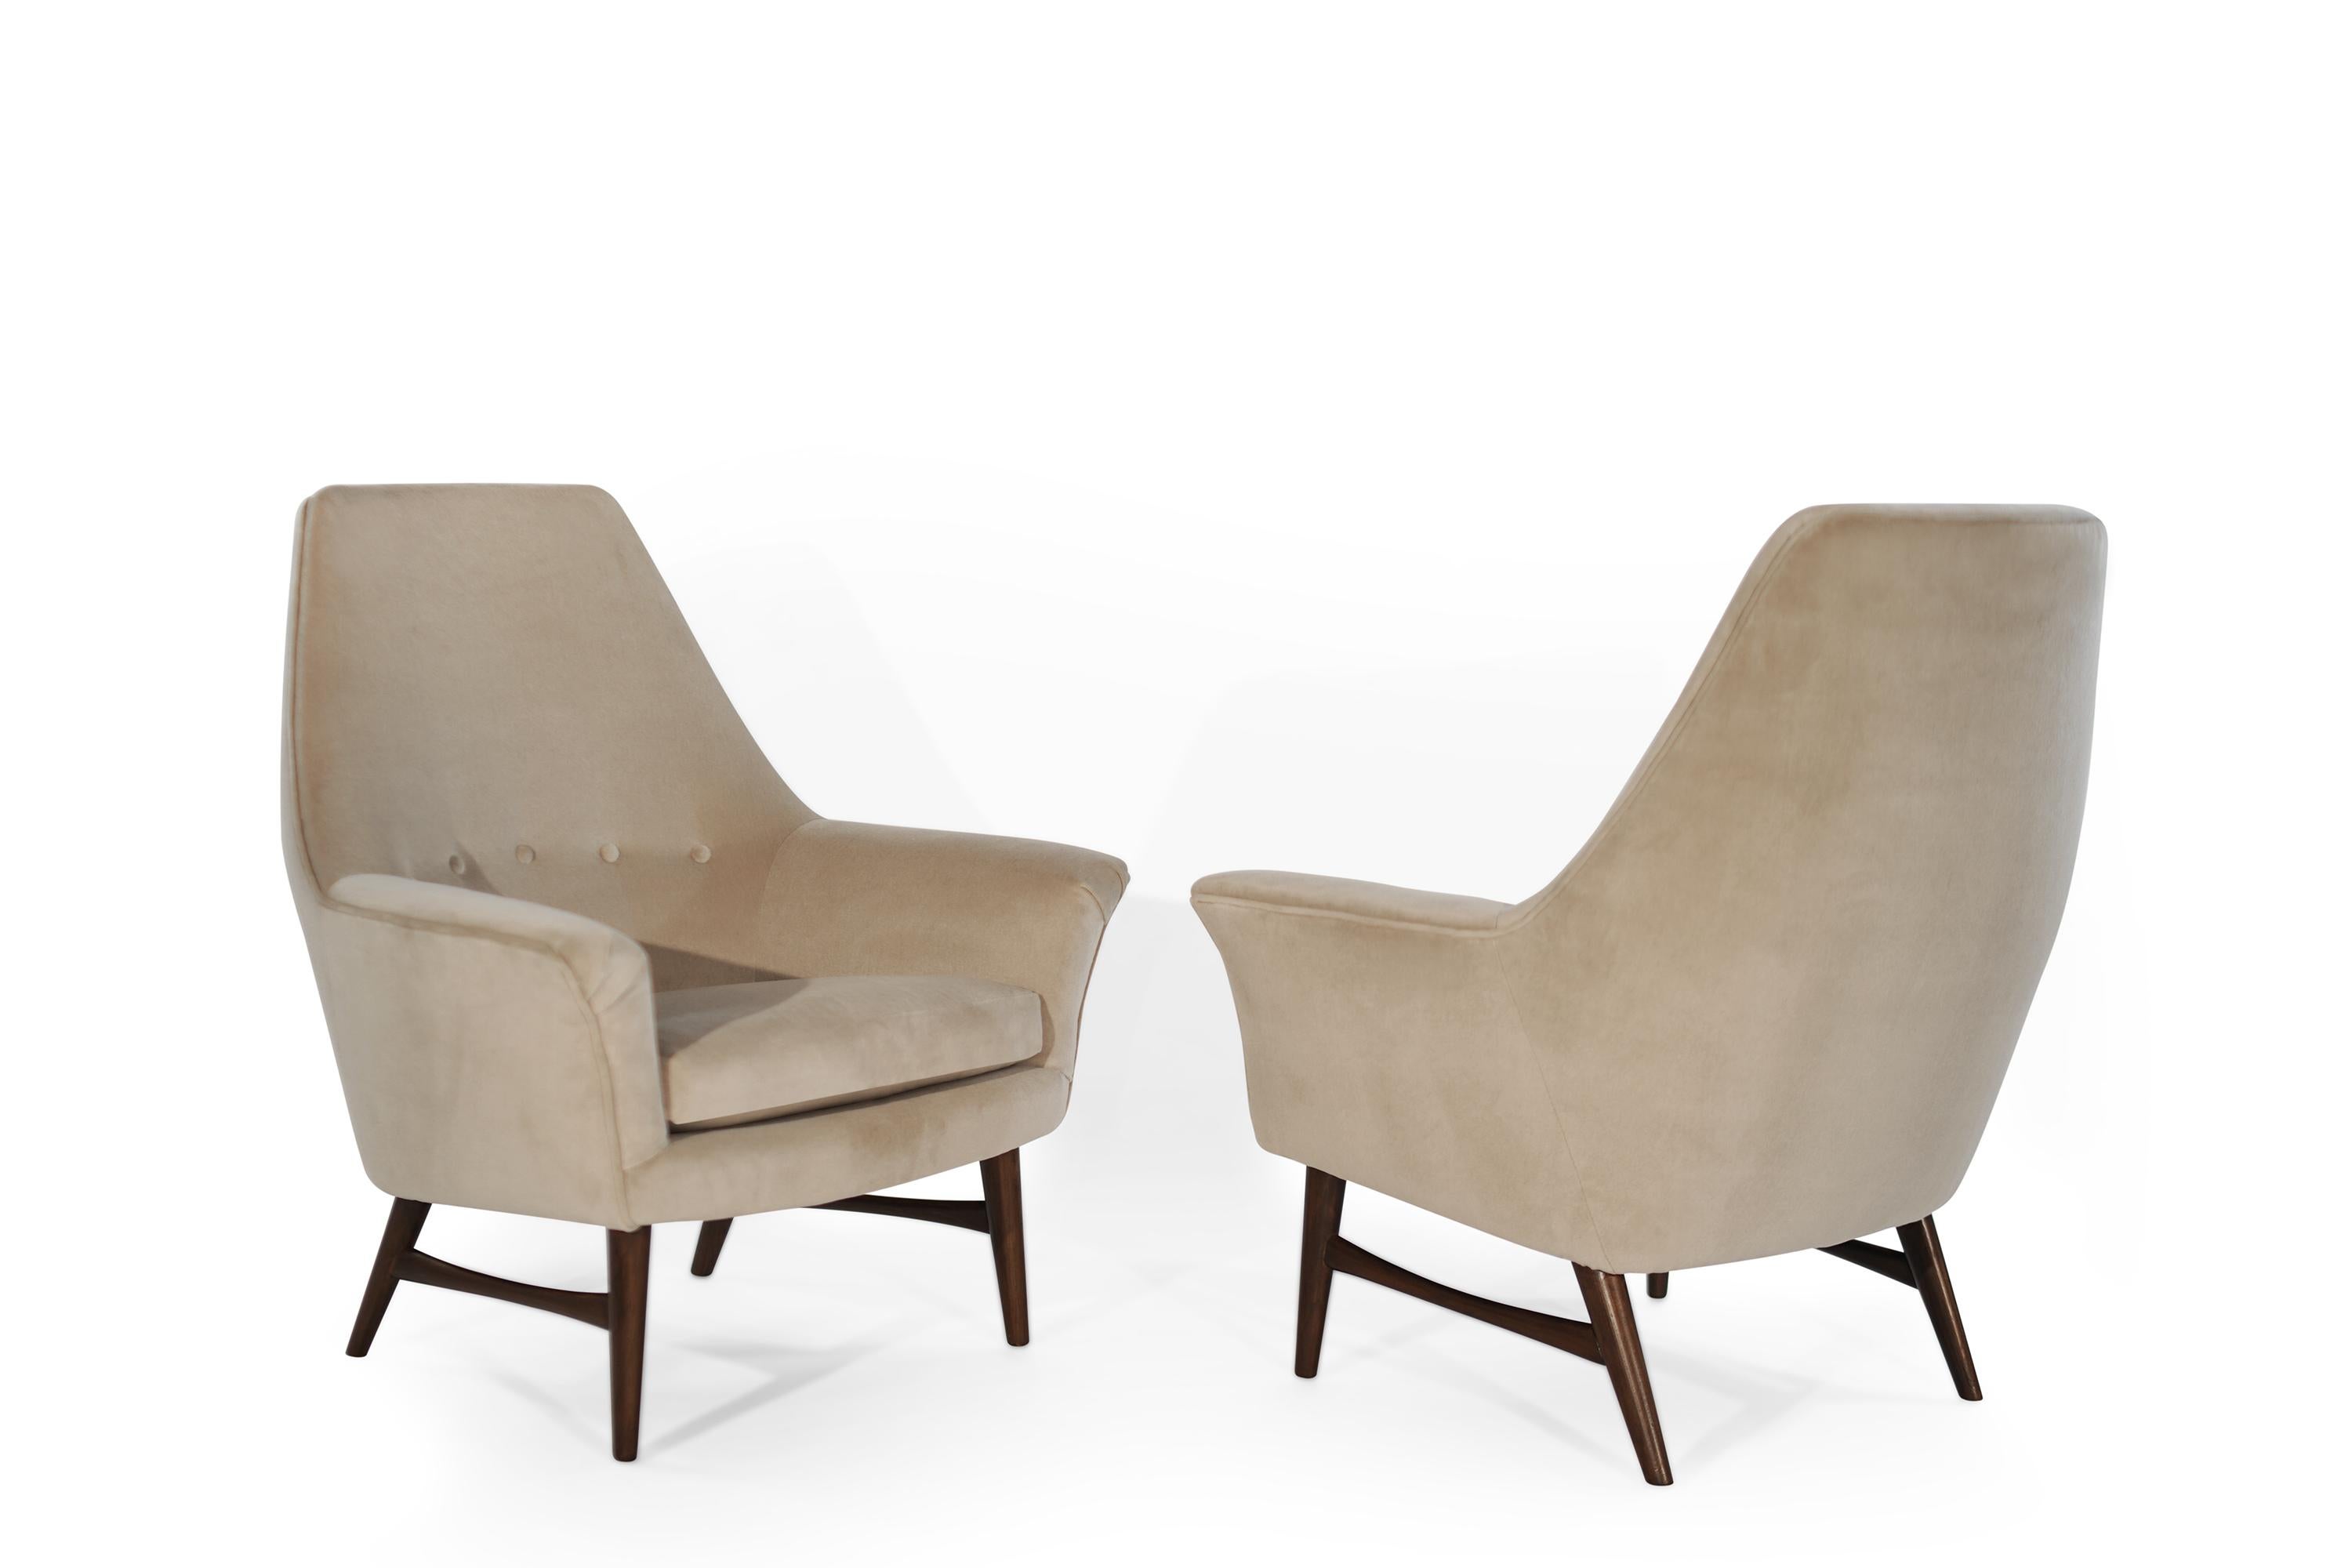 Norwegian High-Back Lounge Chairs by Oscar Langlo in Alpaca Velvet, Norway, 1950s